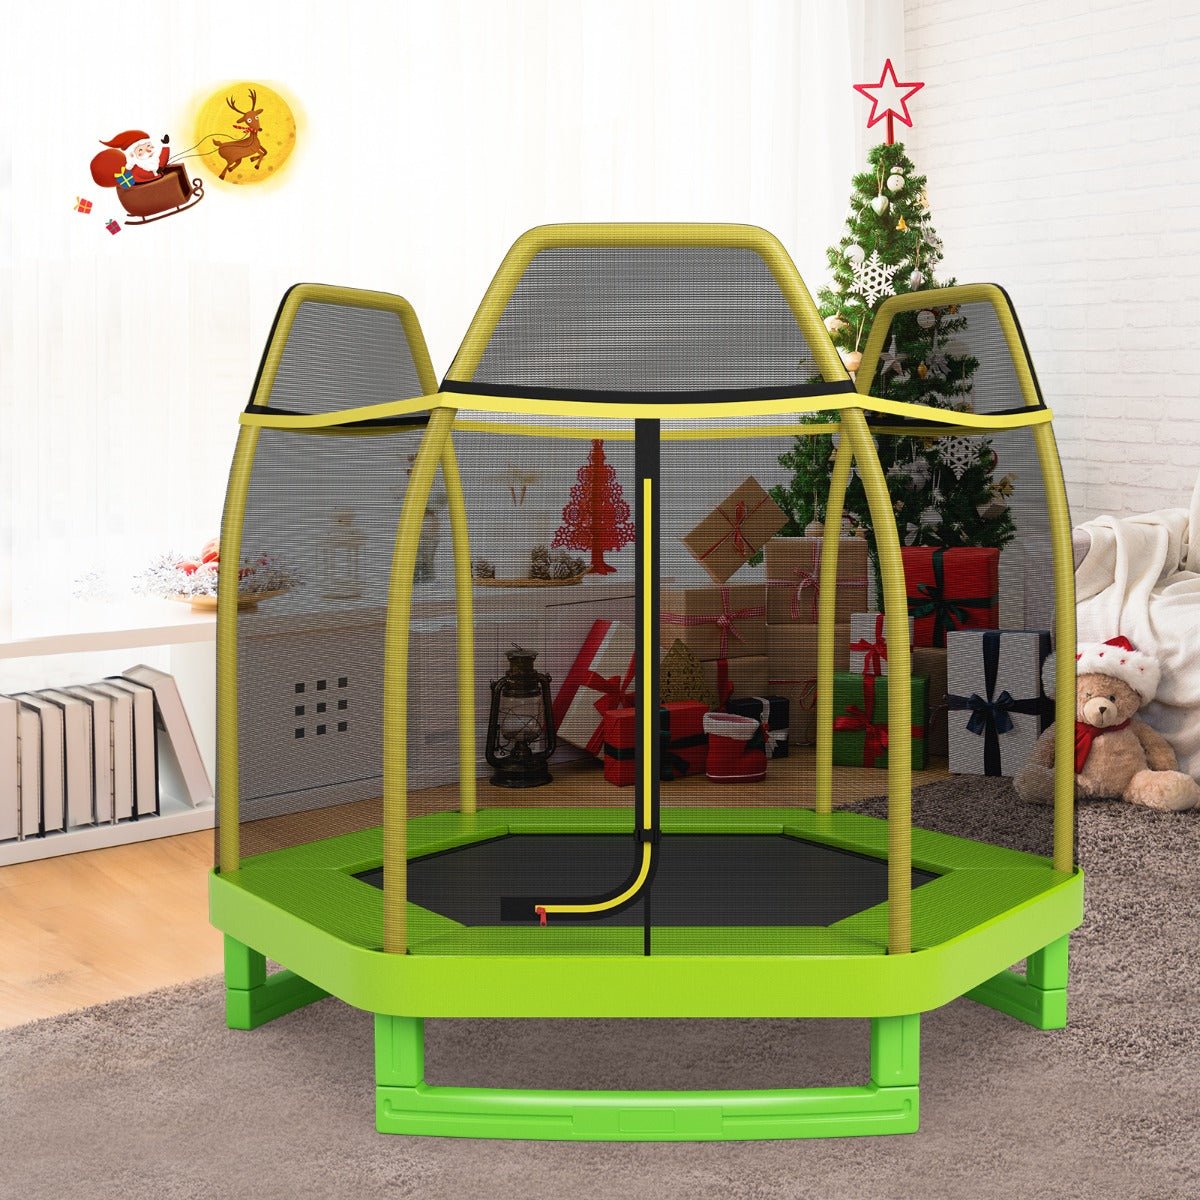 Outdoor Excitement: Kids Trampoline with Safety Enclosure Net for Outdoor Play Green